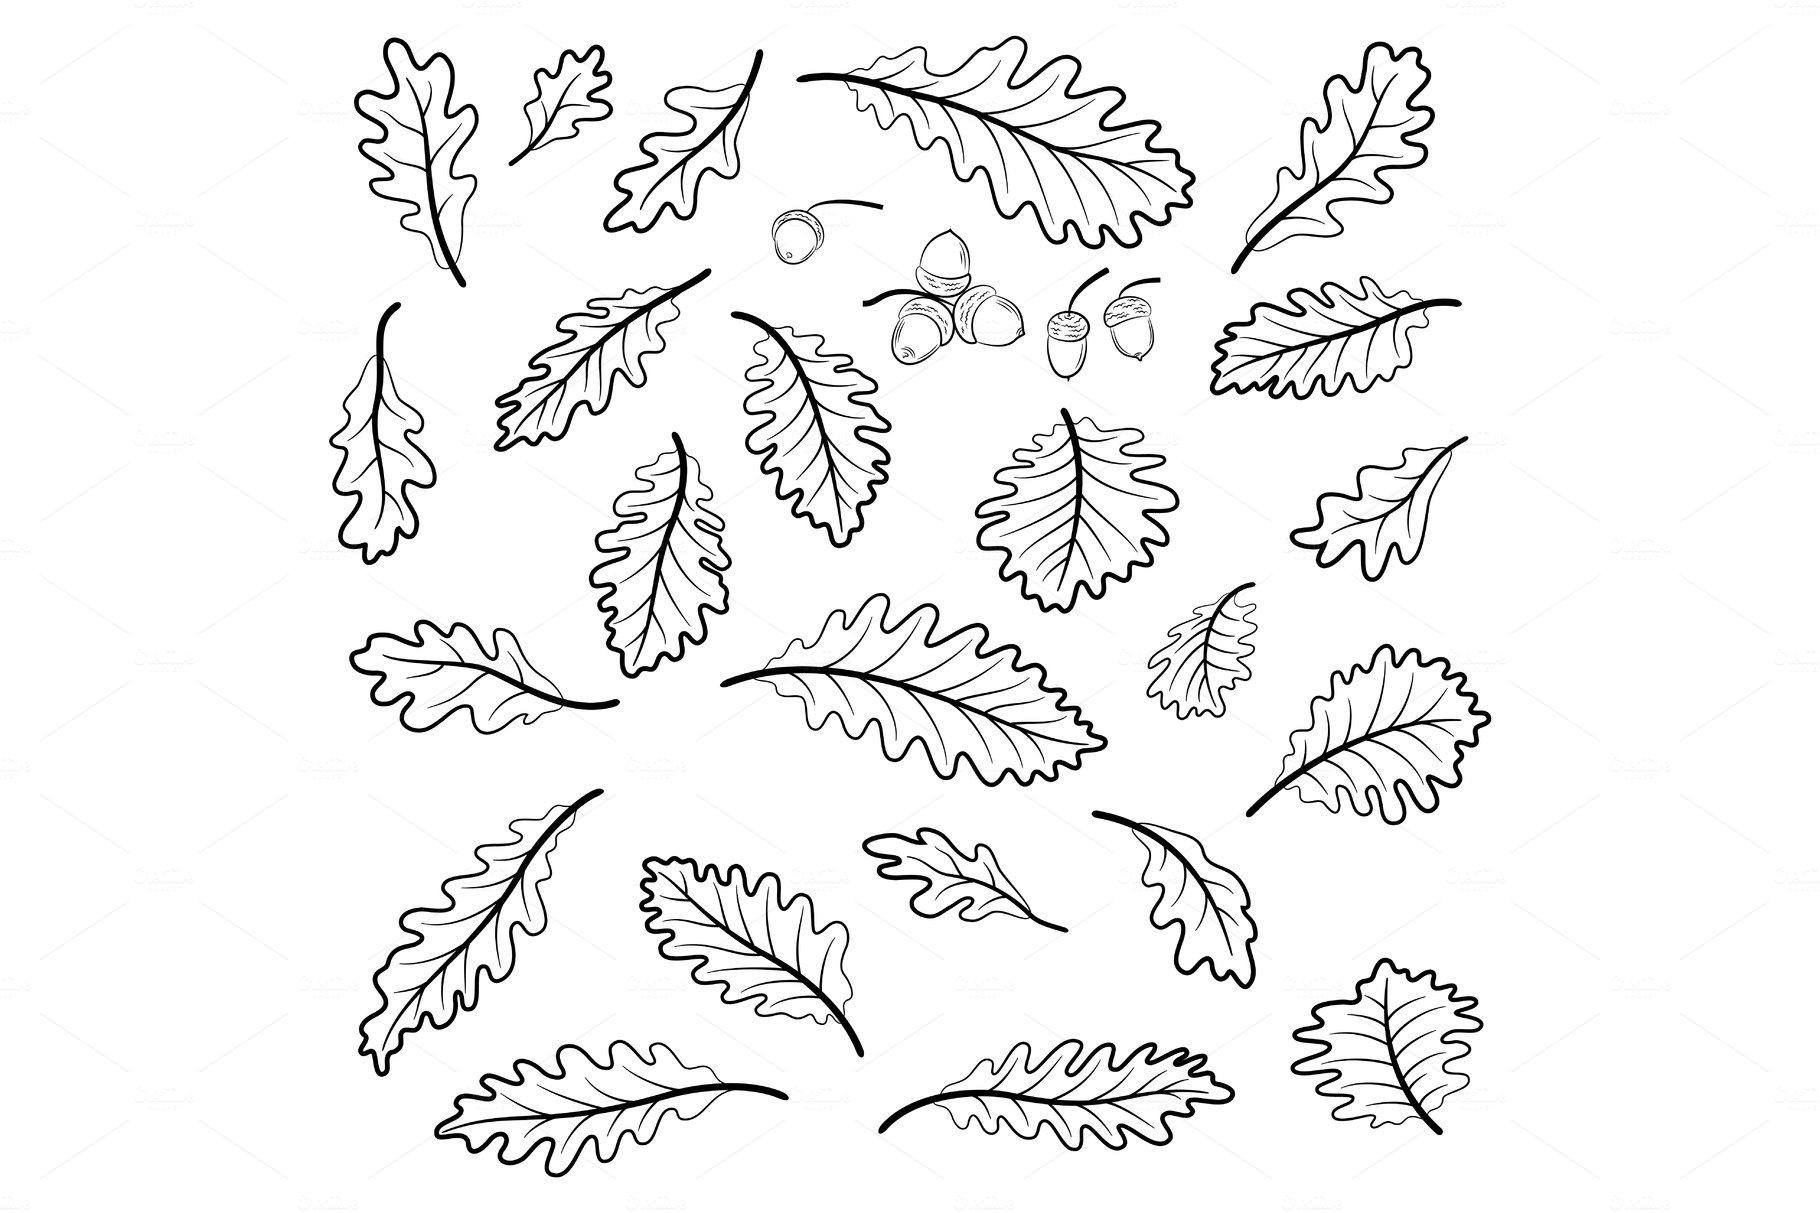 Oak Leaves and Acorns Pictograms cover image.